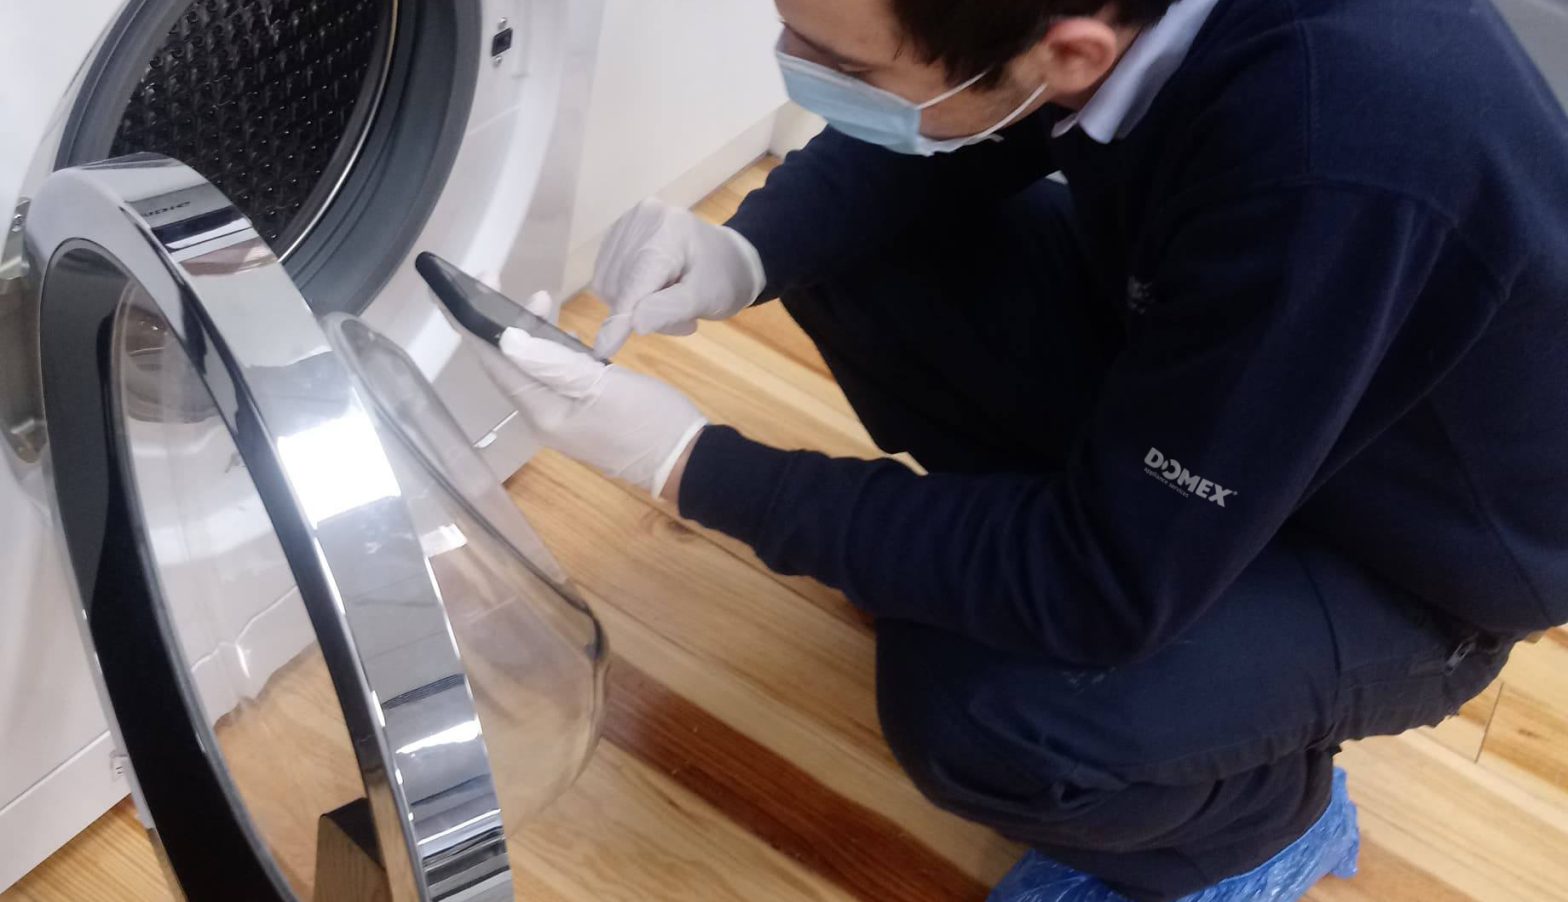 Domex engineer repairing washing machine in COVID-19 safety PPE